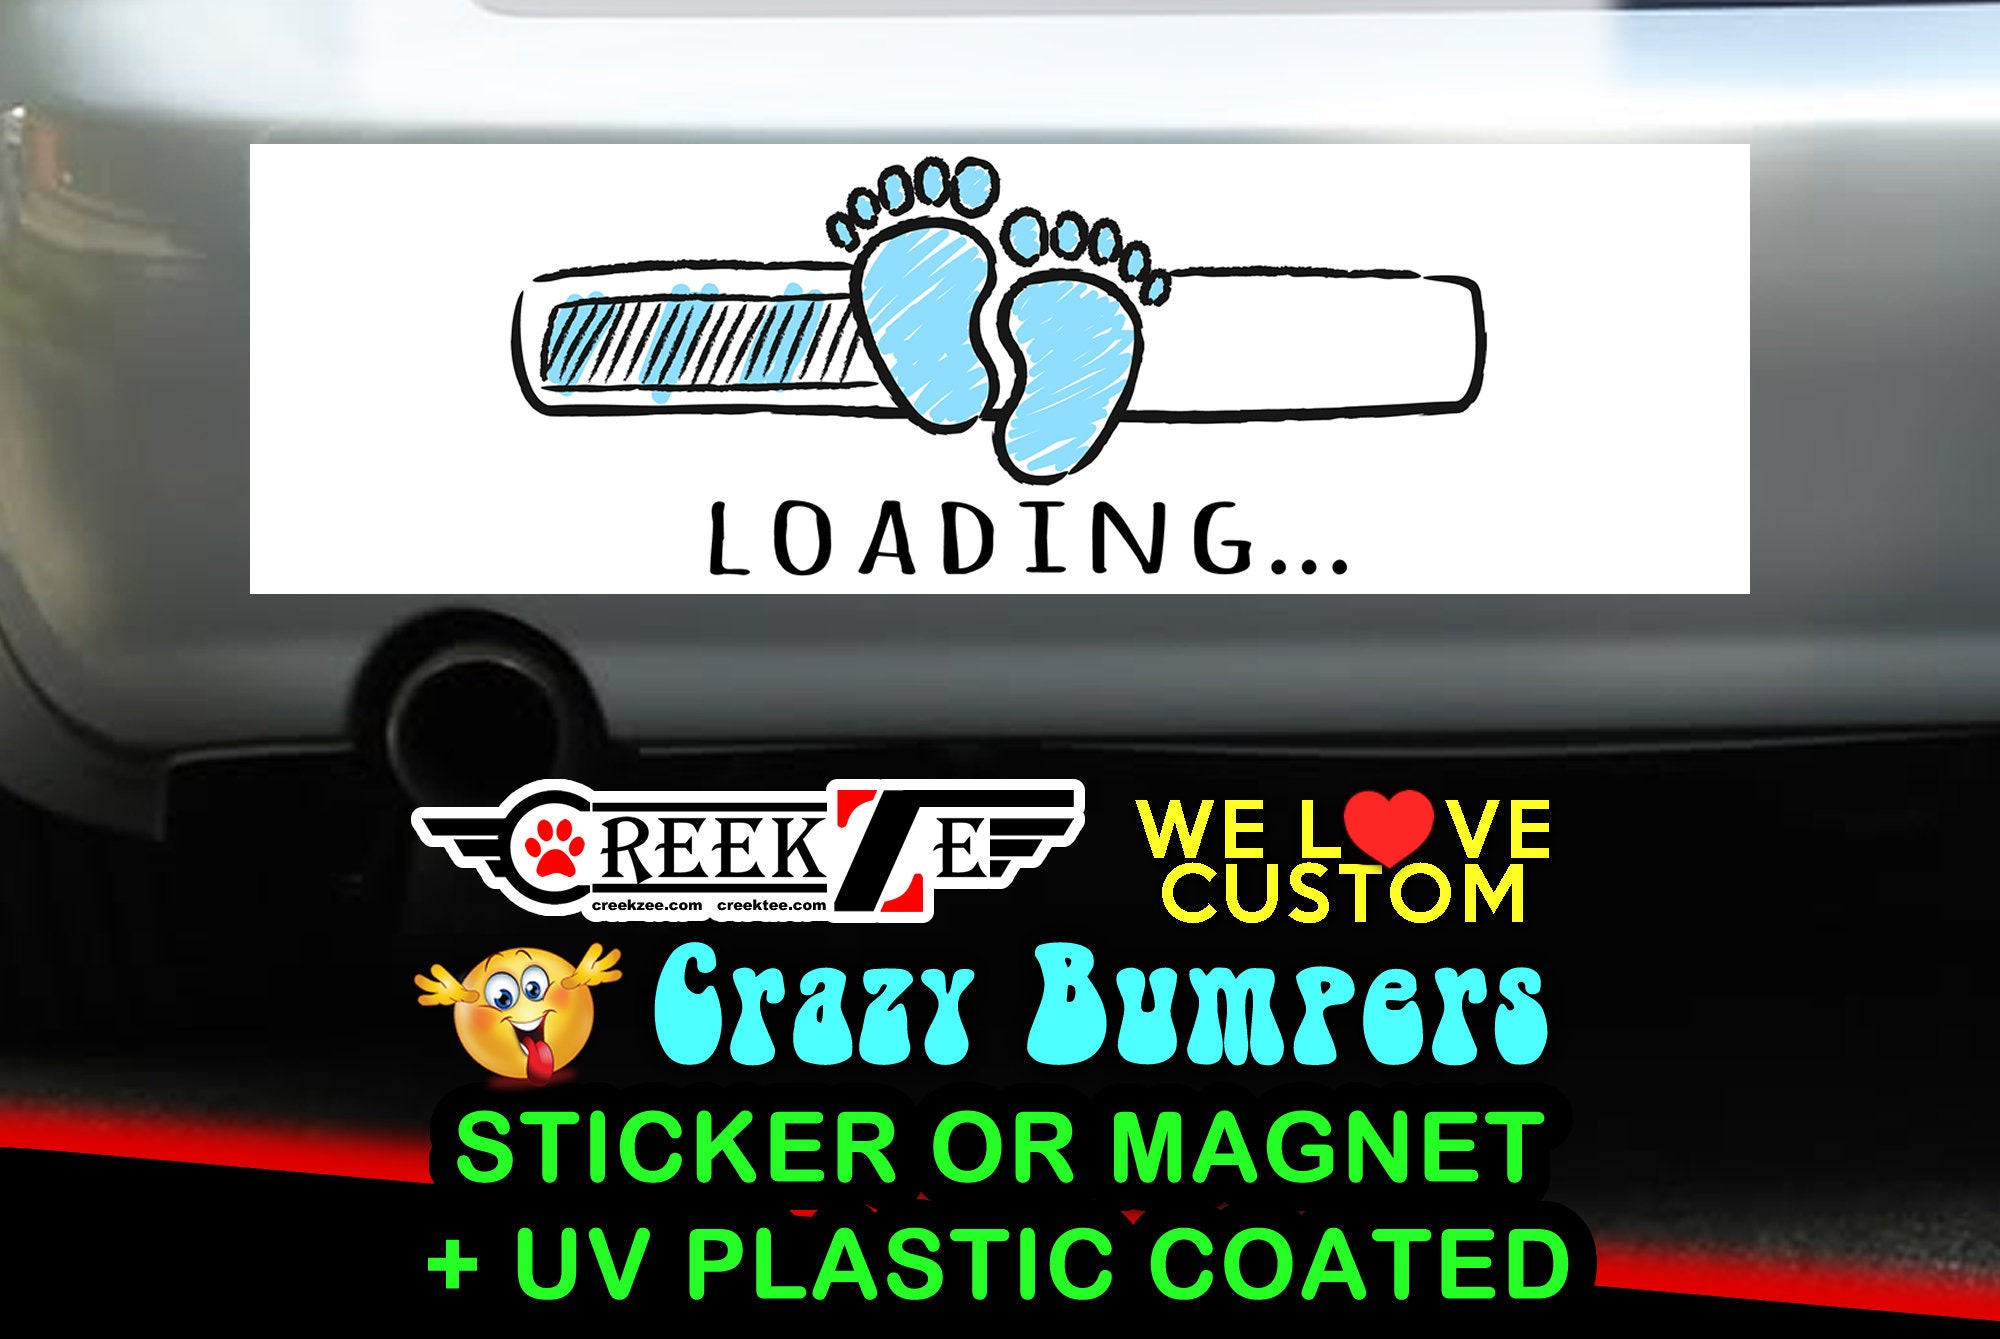 Blue Feet Baby Loading Bumper Sticker or Magnet, various sizes available! Customizable